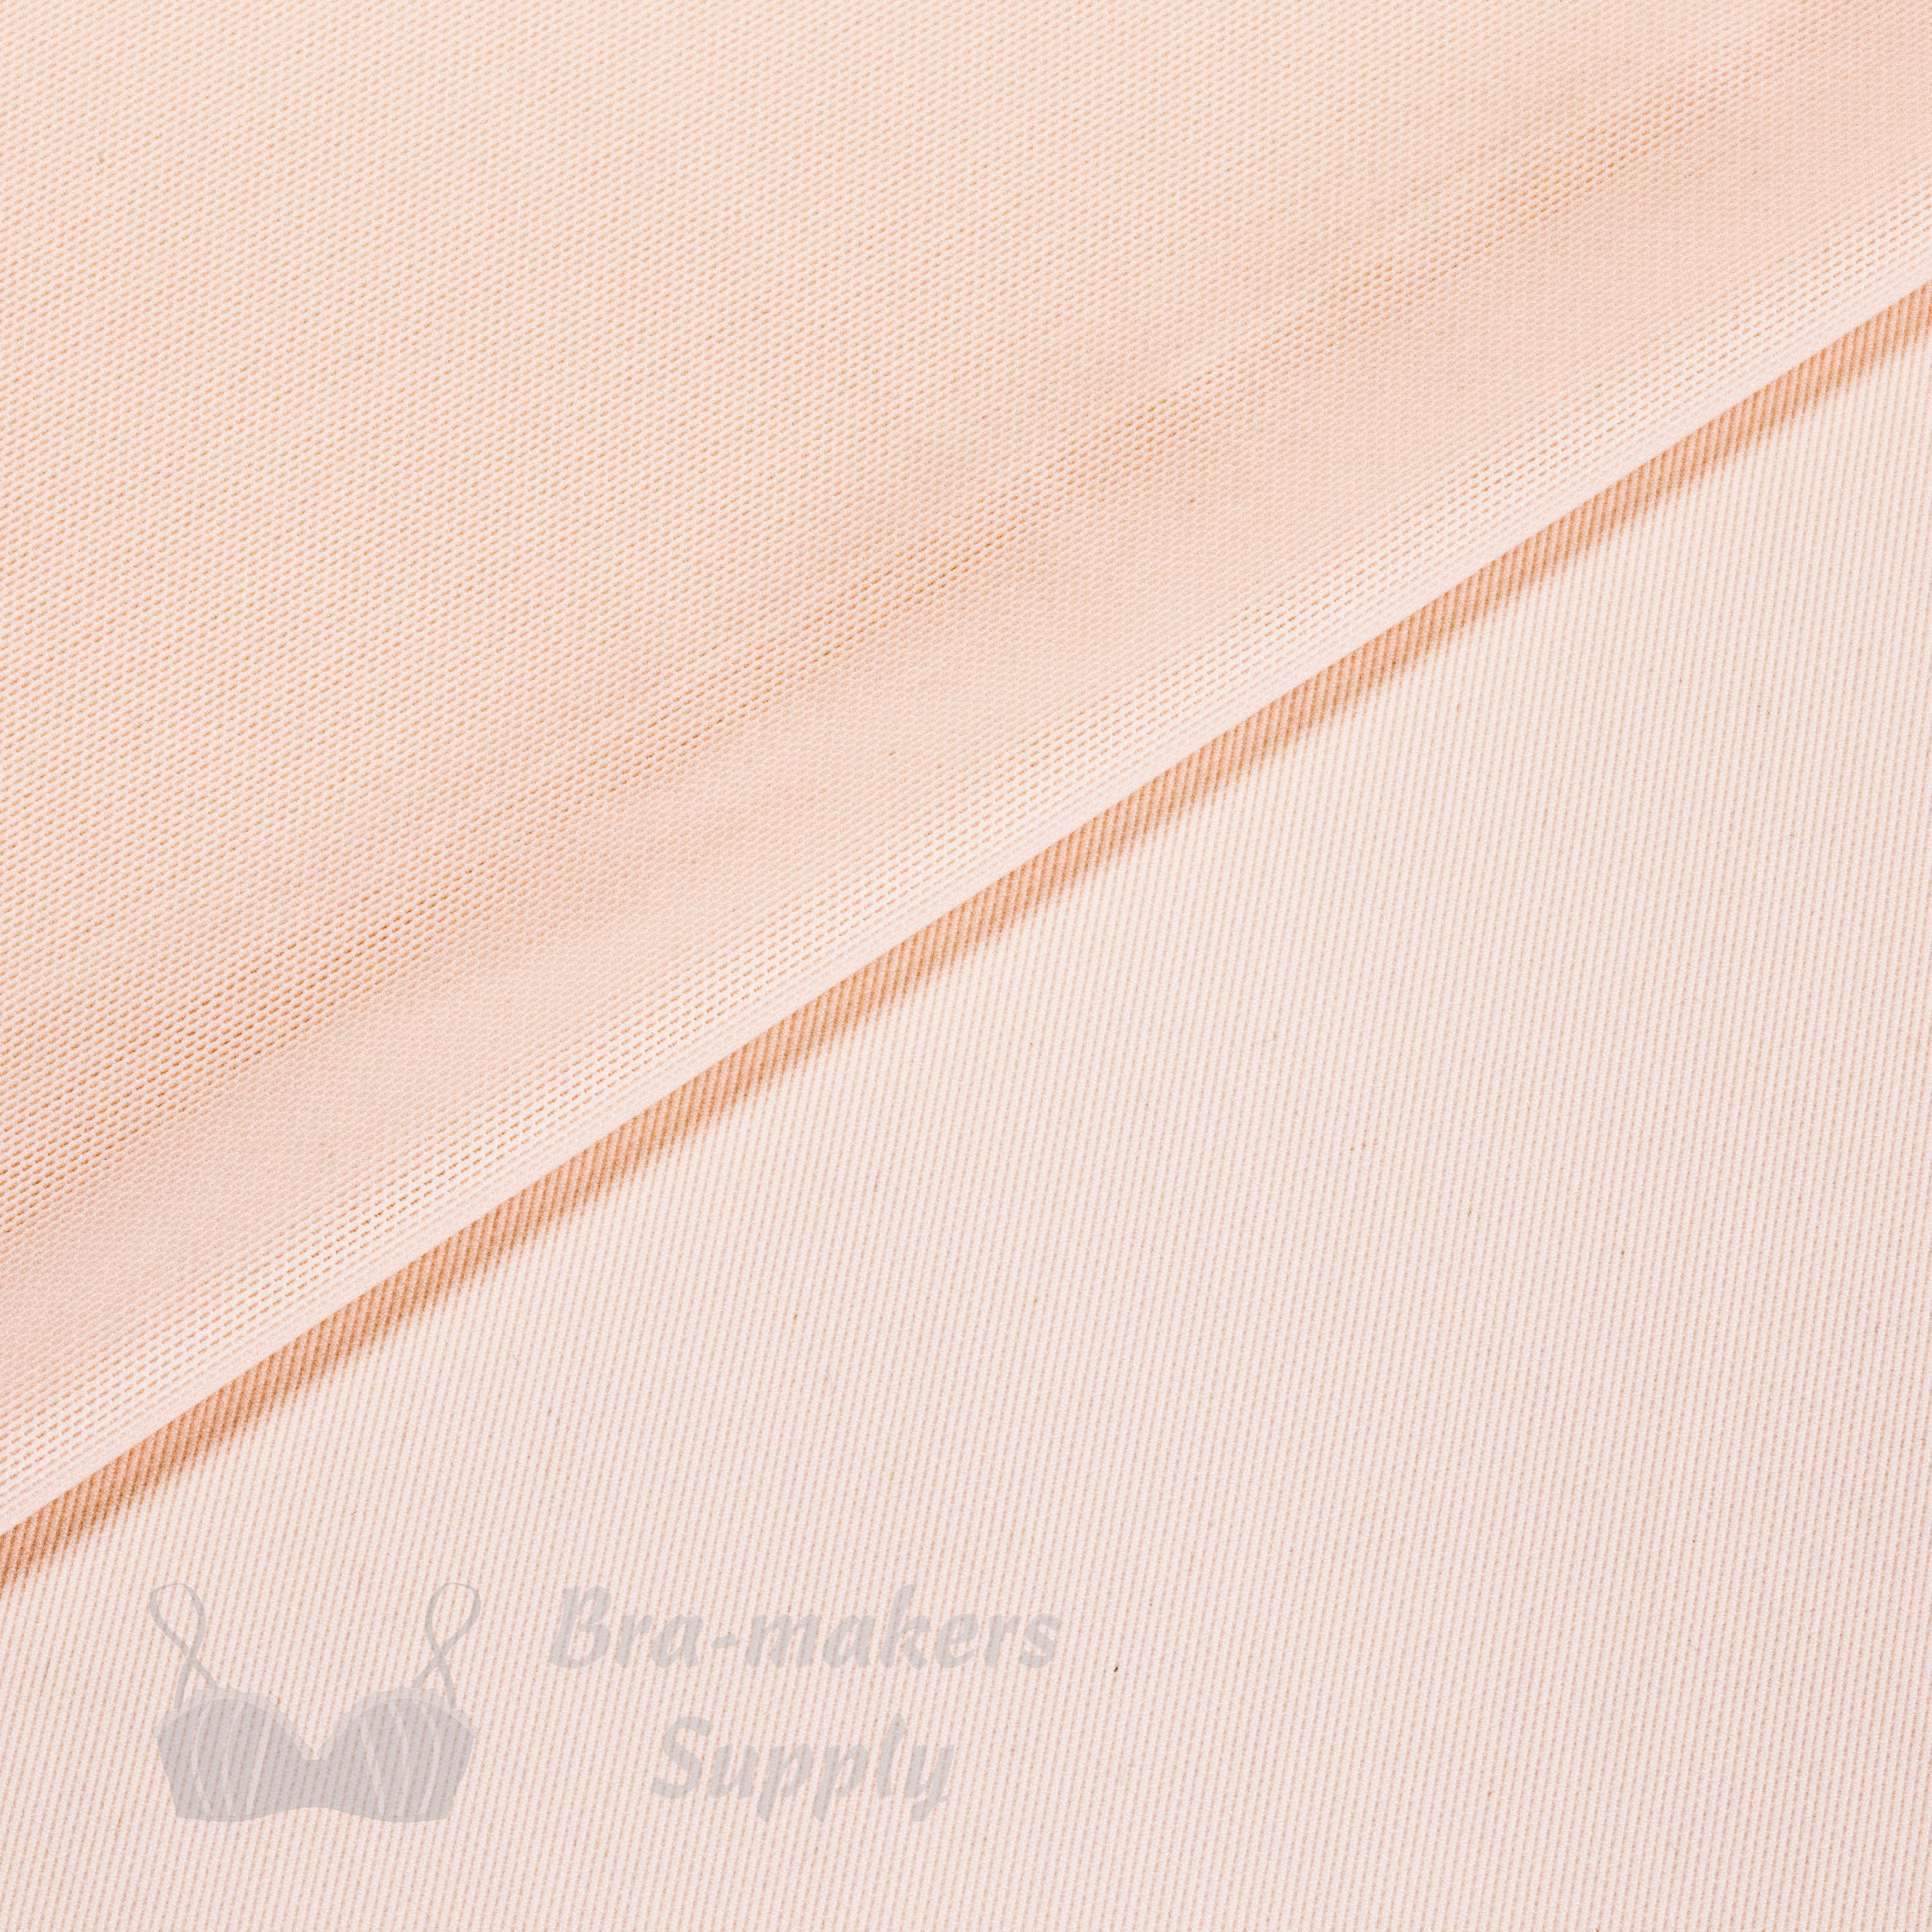 power net power mesh FP-1 peach or stretch bra band wings fabric angel wing Pantone 11-1305 from Bra-Makers Supply folded